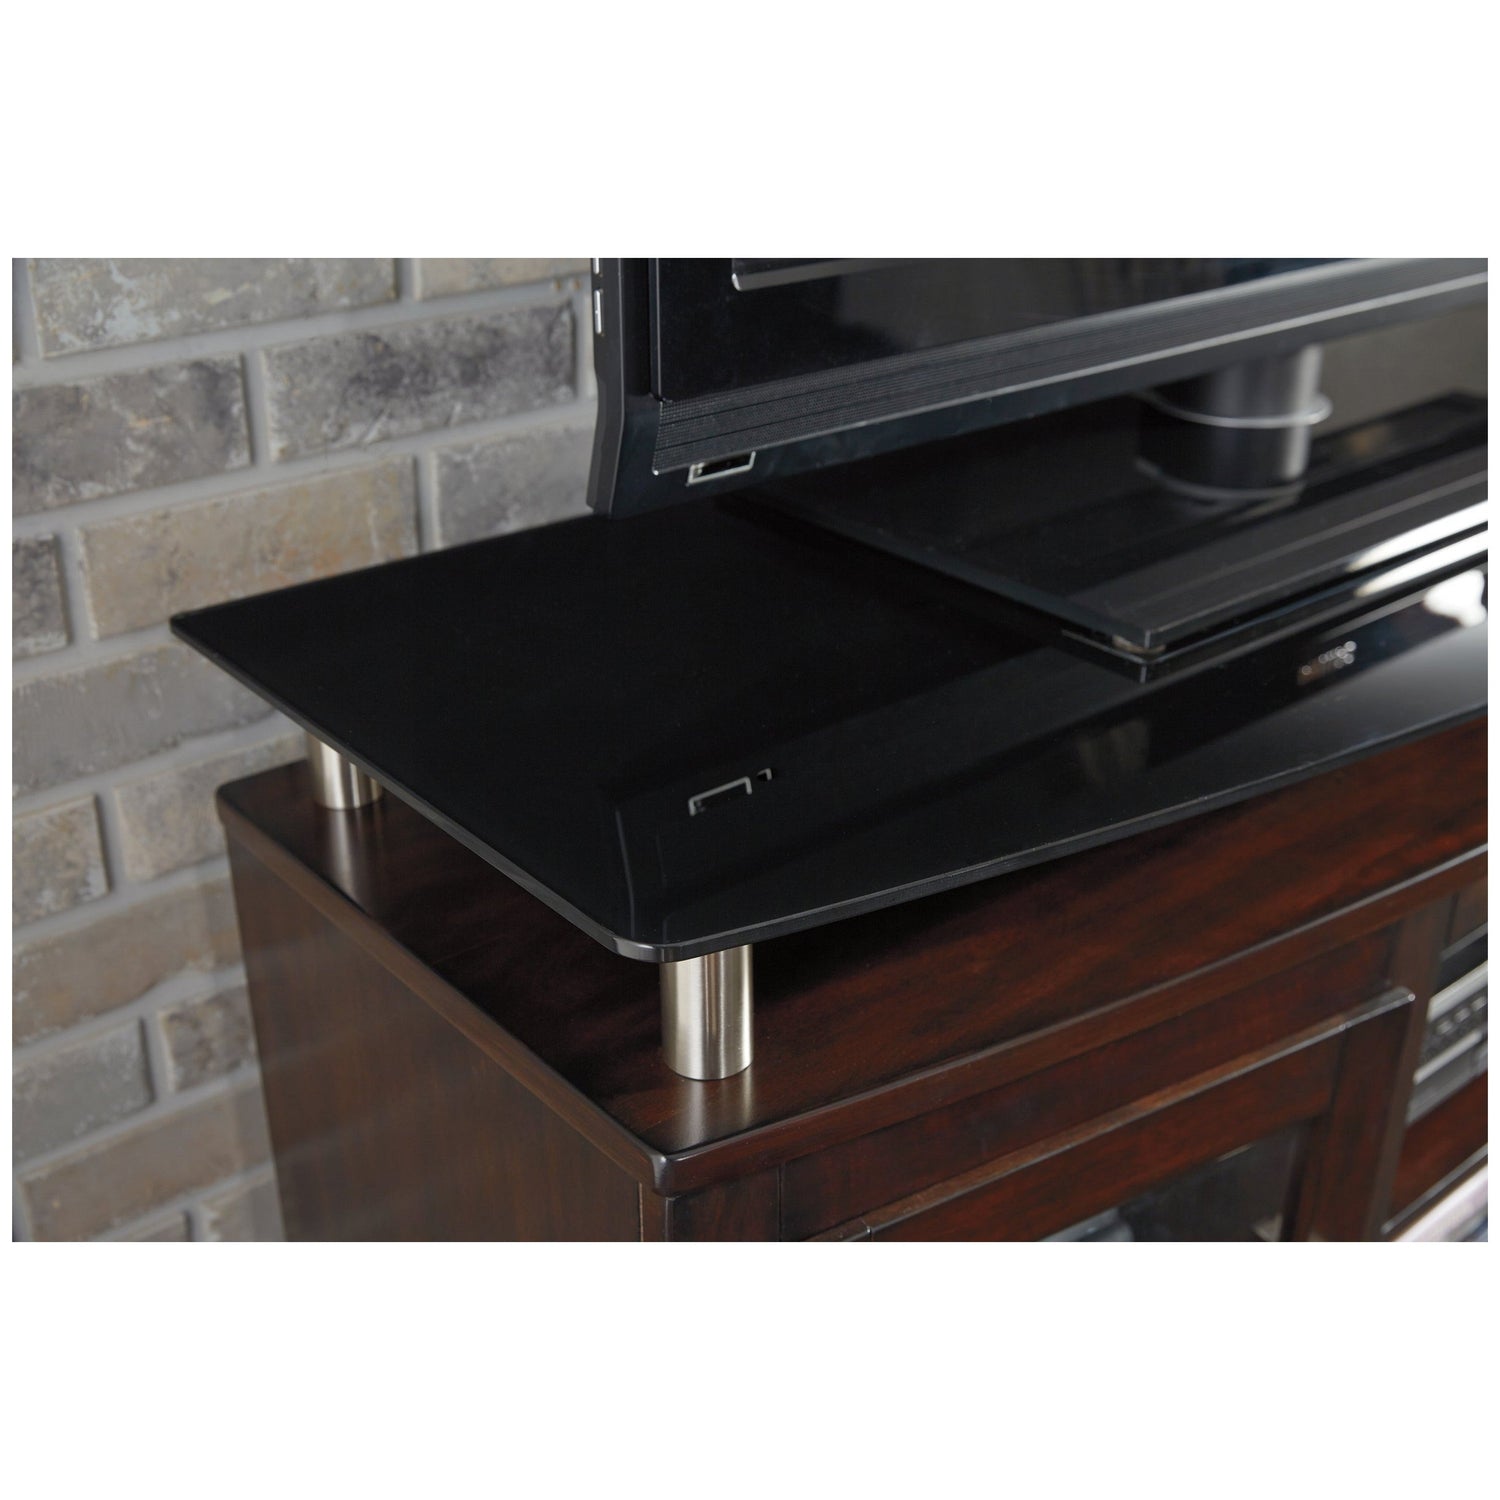 Chanceen 60&quot; TV Stand with Electric Fireplace Ash-W757W4